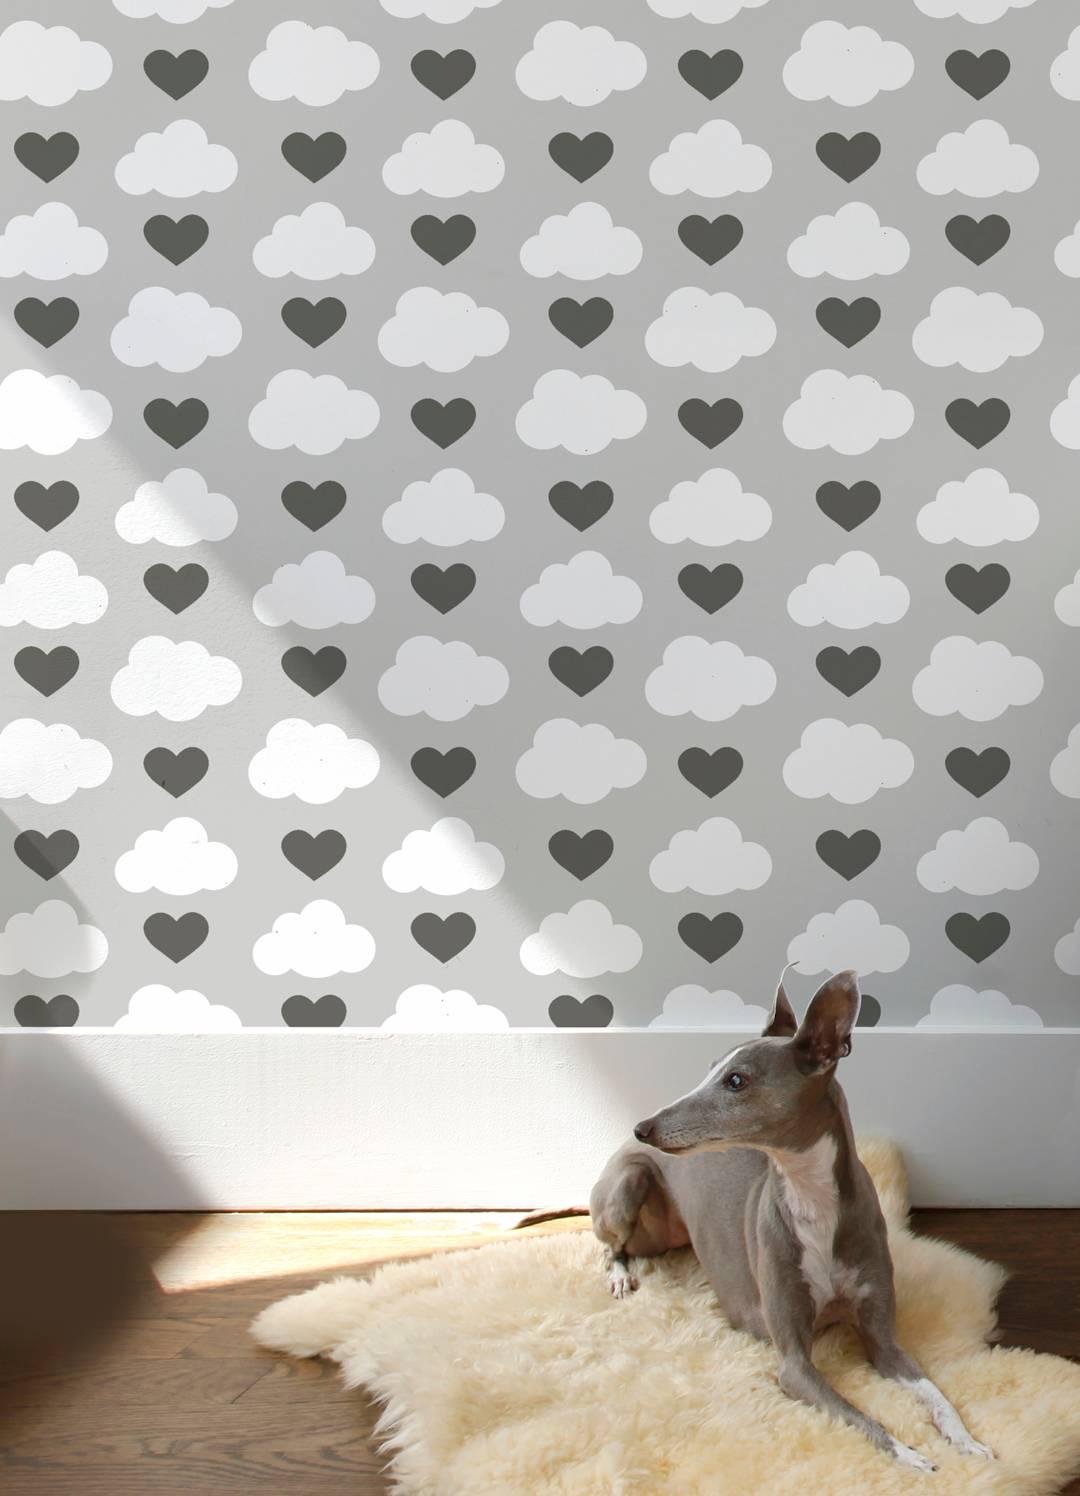 This hand-printed wall-covering is as simple as it is elegant! Hearts and clouds... the perfect wallpaper for your child's room, playroom or nursery.
 
Samples are available for $18 including US shipping, please message us to purchase.  

Printing: